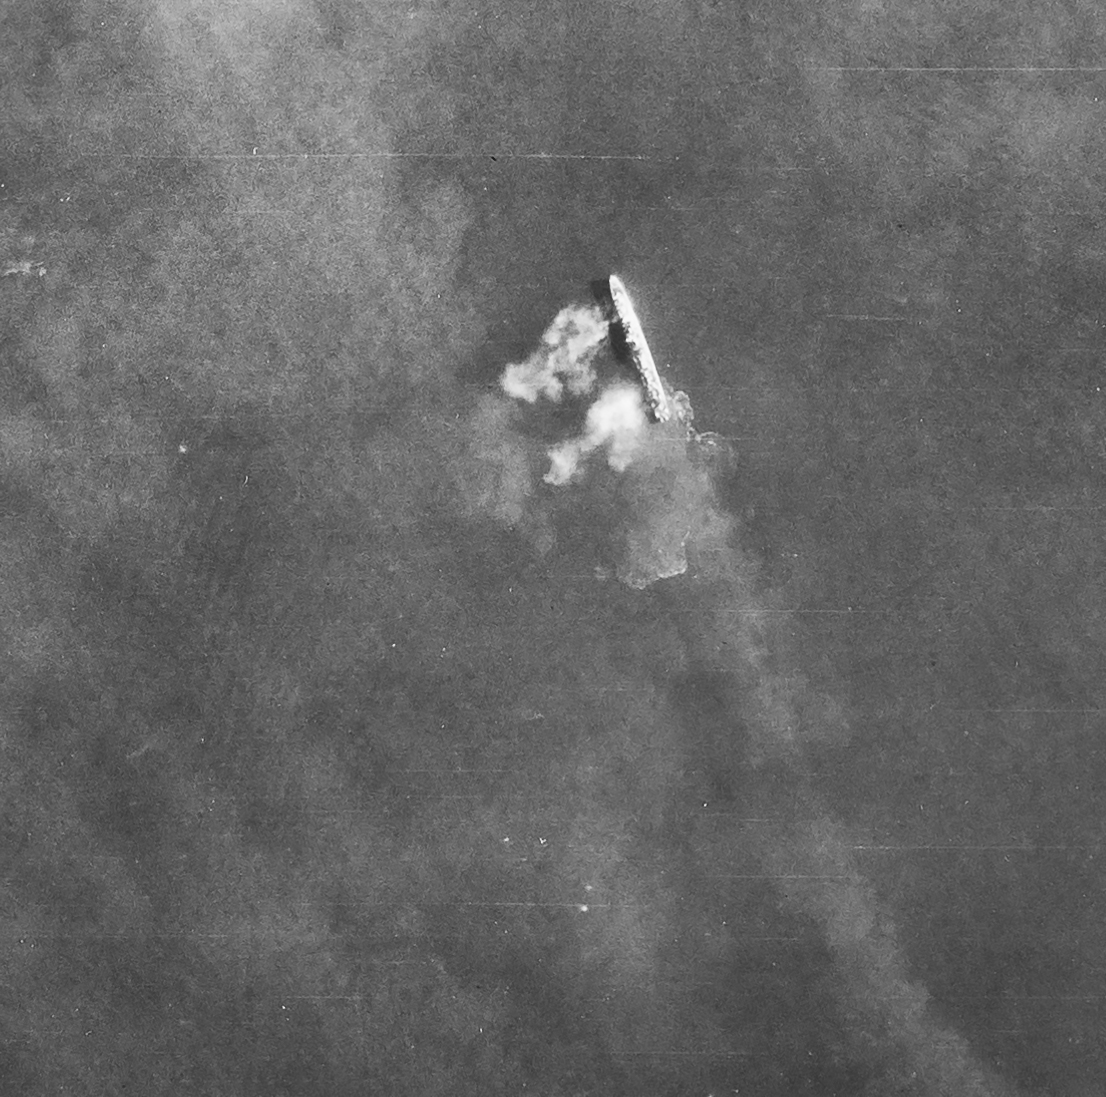 Detail from a black and white vertical aerial photograph, showing a waship at sea. Puffs of smoke to the left of the ship suggest that its guns are firing. Above the ship, wafts of smoke partly obscure the view.